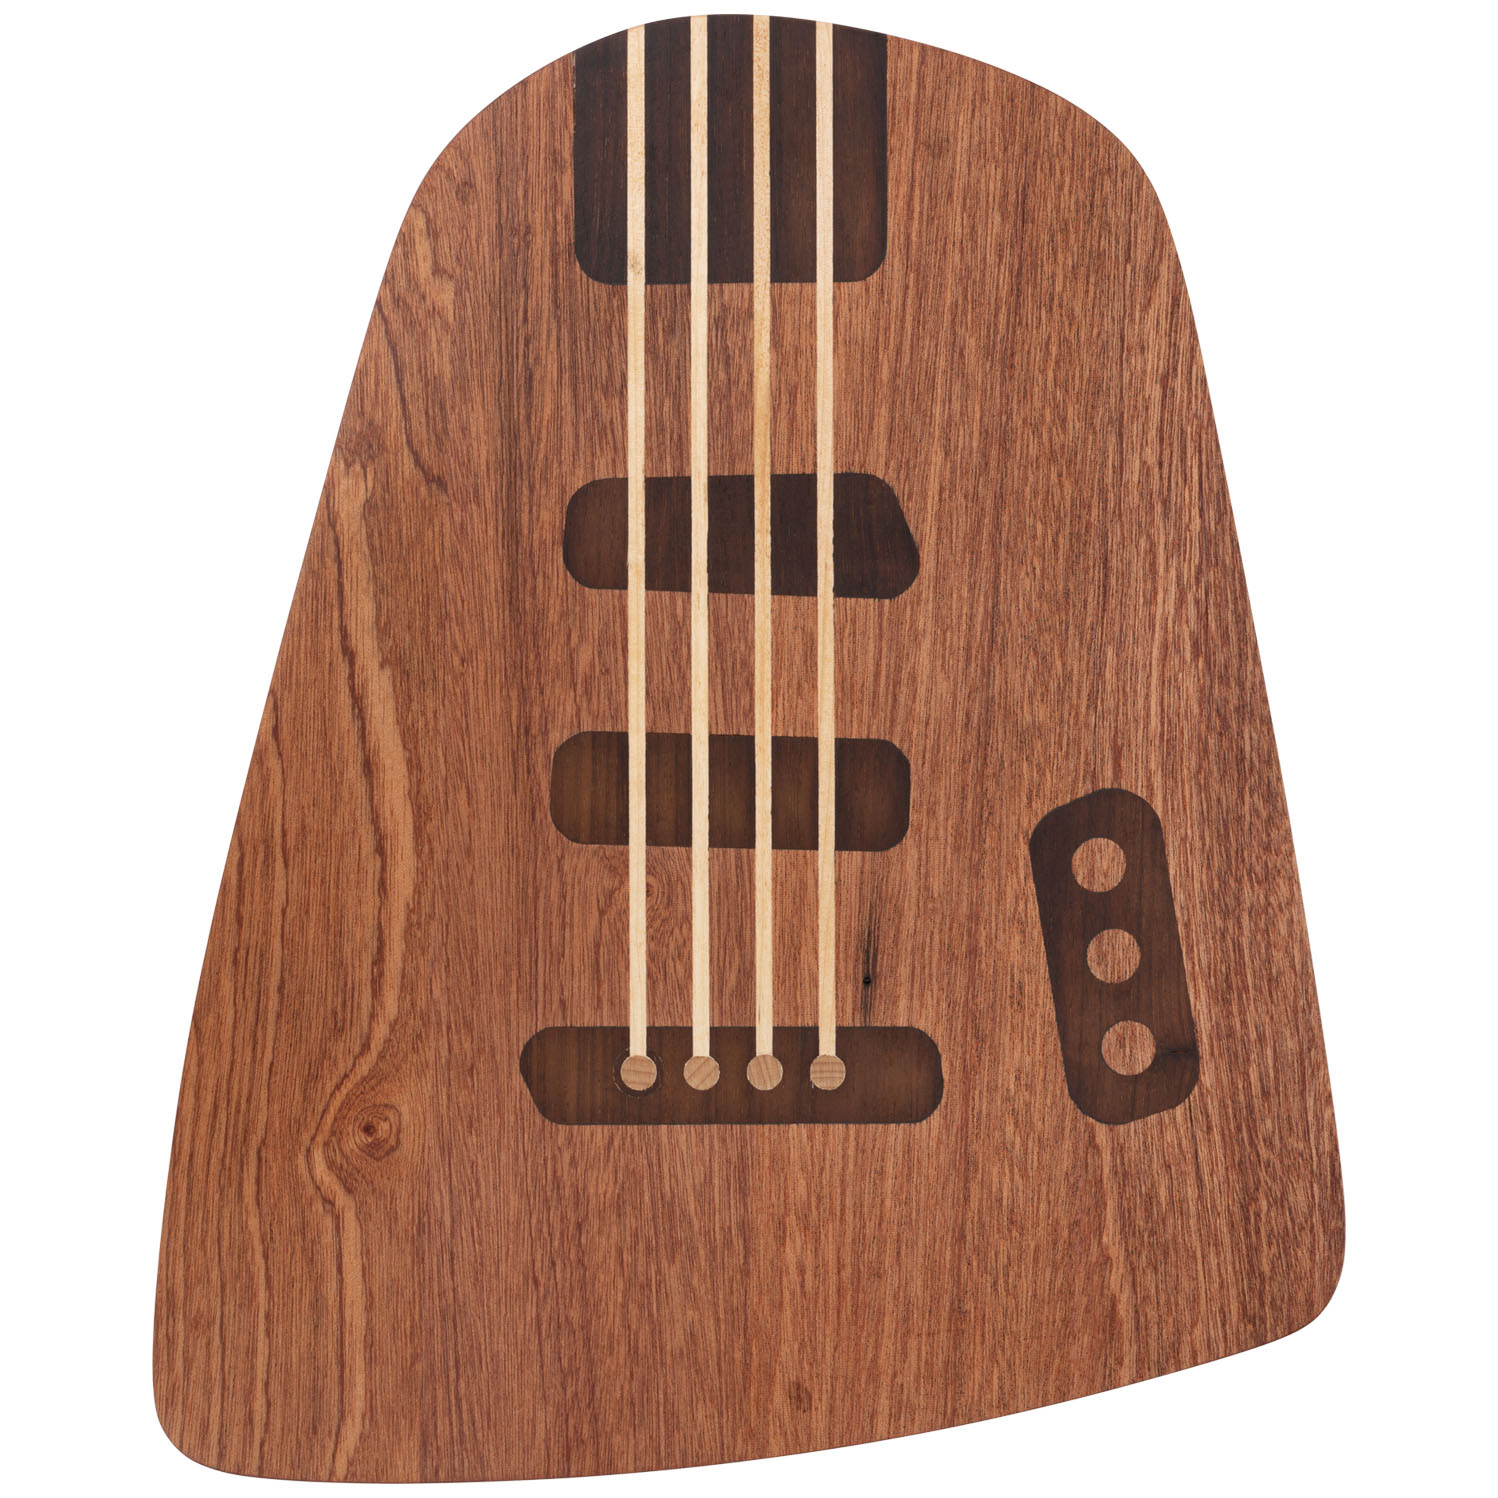 Musical Instrument Series Wooden Electric Guitar Cutting Board